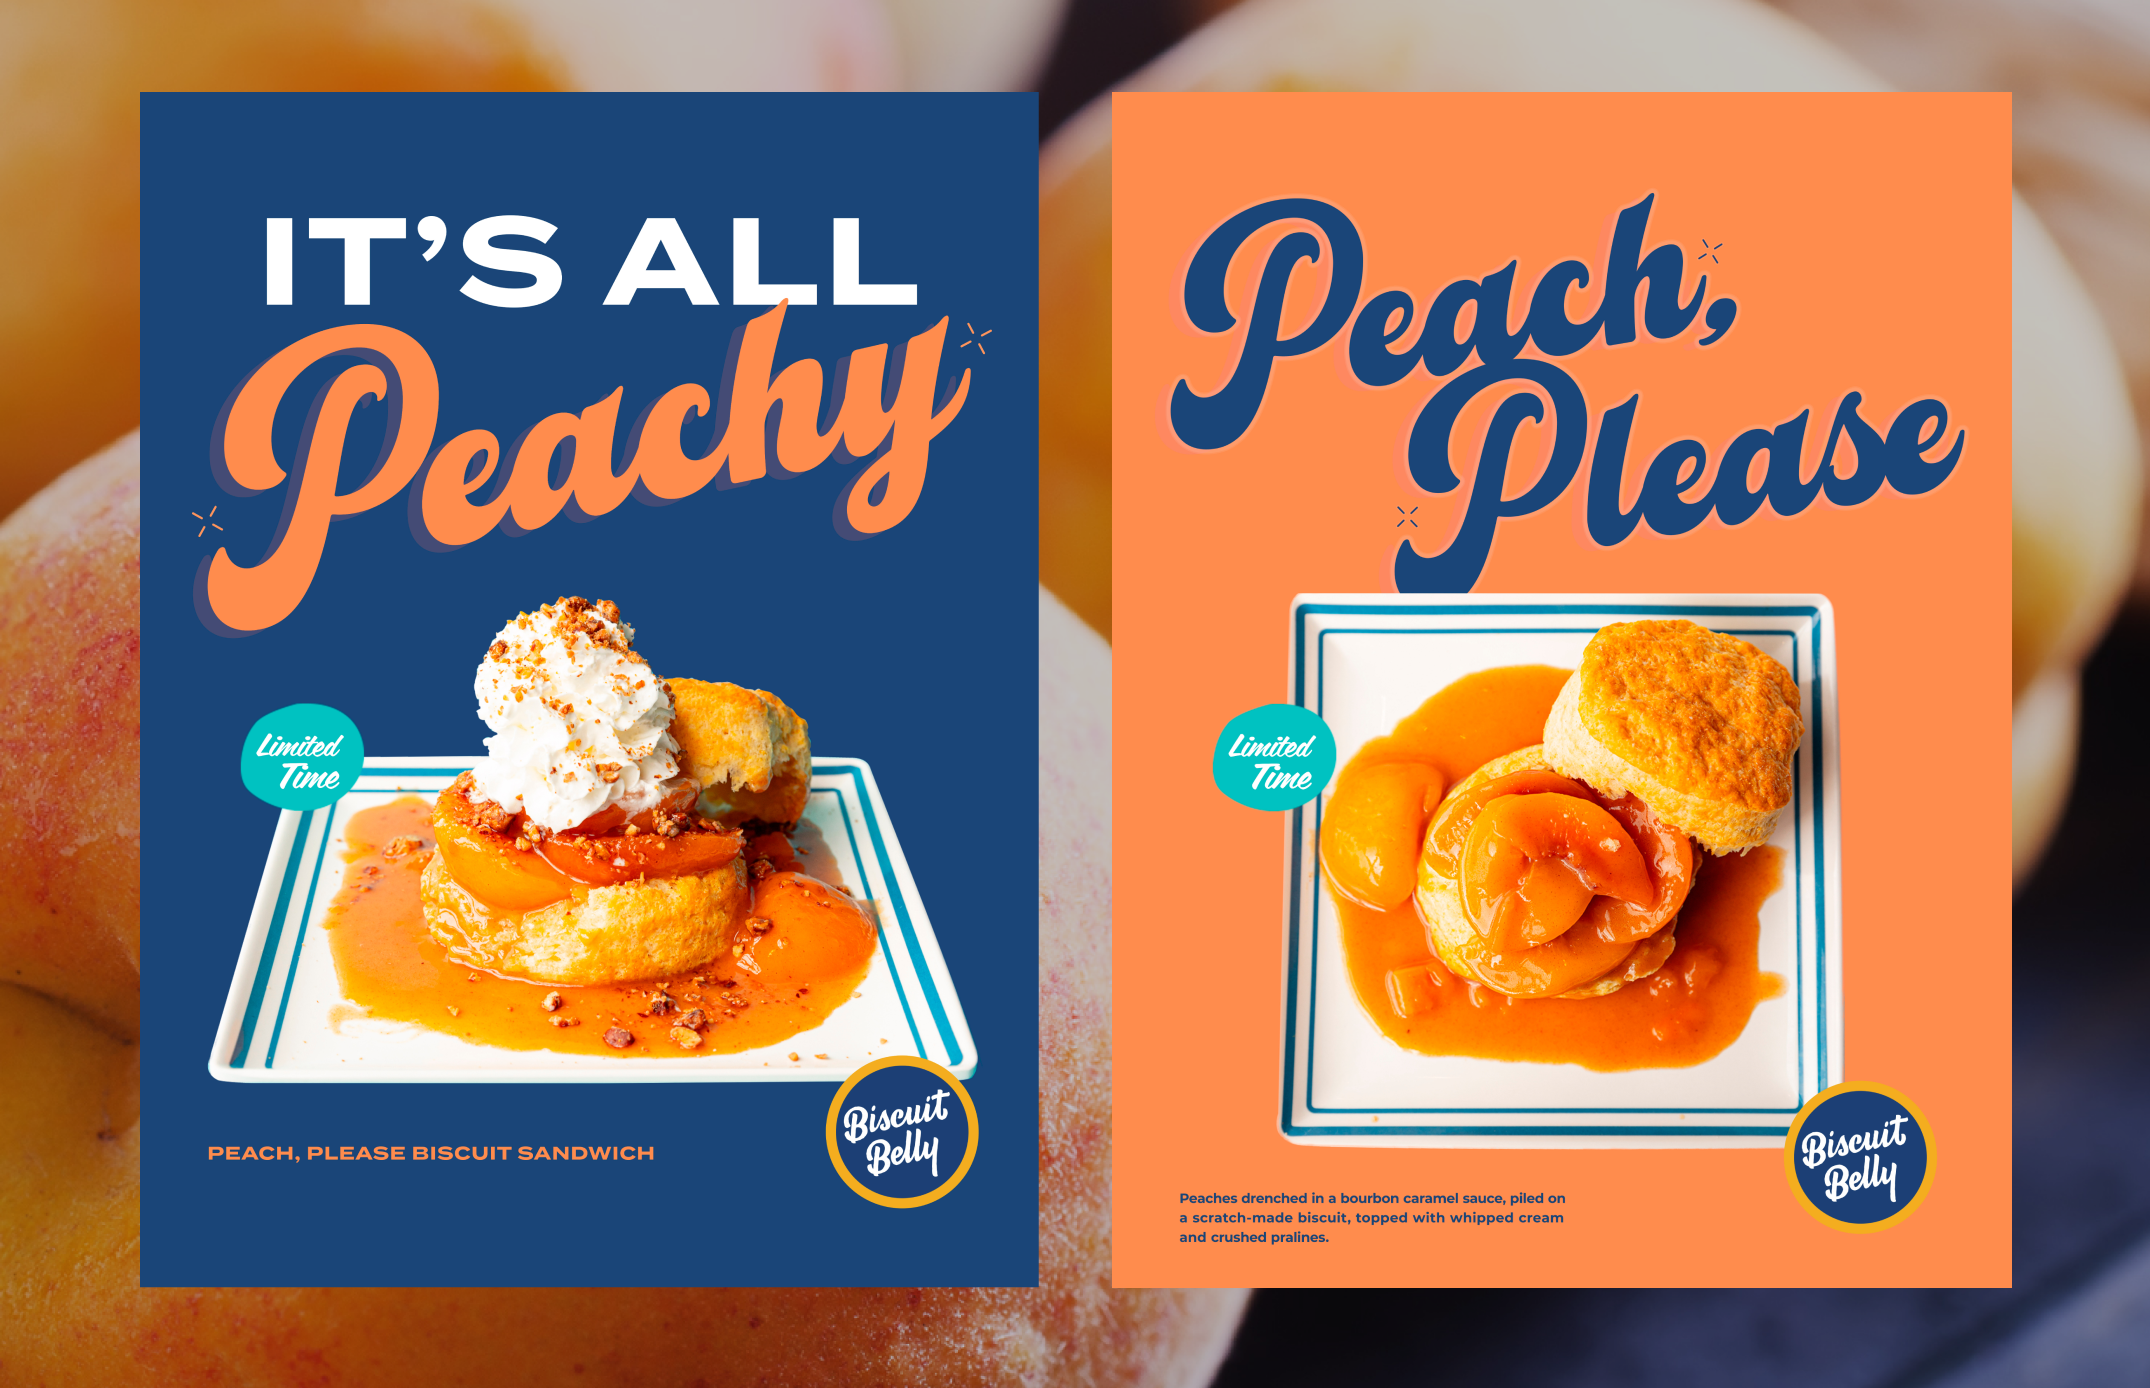 Two posters featuring peach dishes. One reads "Its all peachy." while the other reads "Peach please."